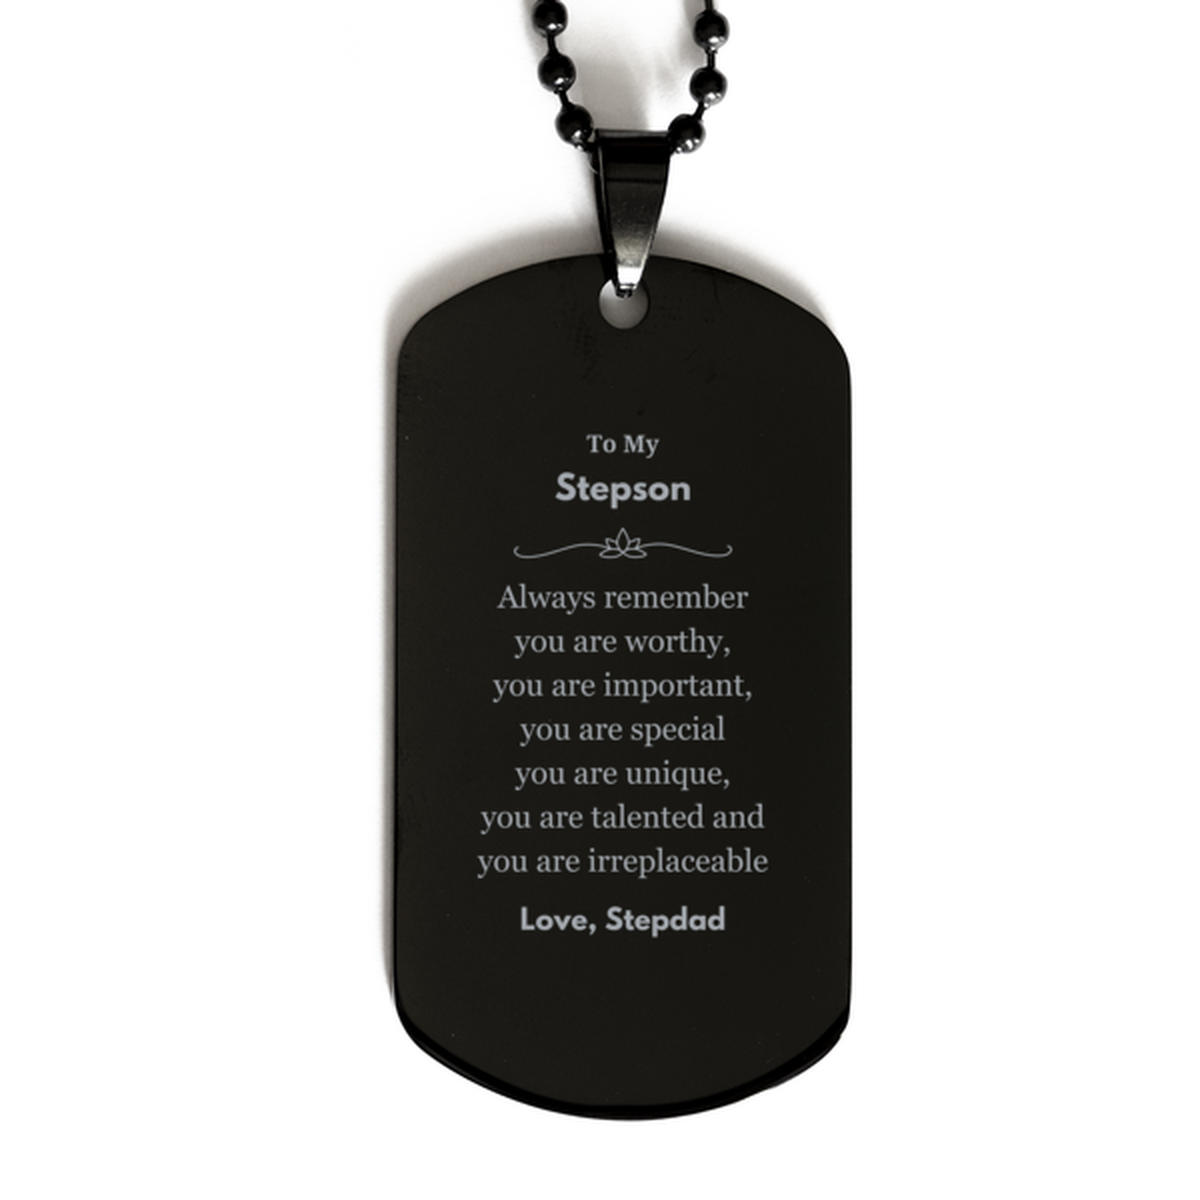 Stepson Birthday Gifts from Stepdad, Inspirational Black Dog Tag for Stepson Christmas Graduation Gifts for Stepson Always remember you are worthy, you are important. Love, Stepdad